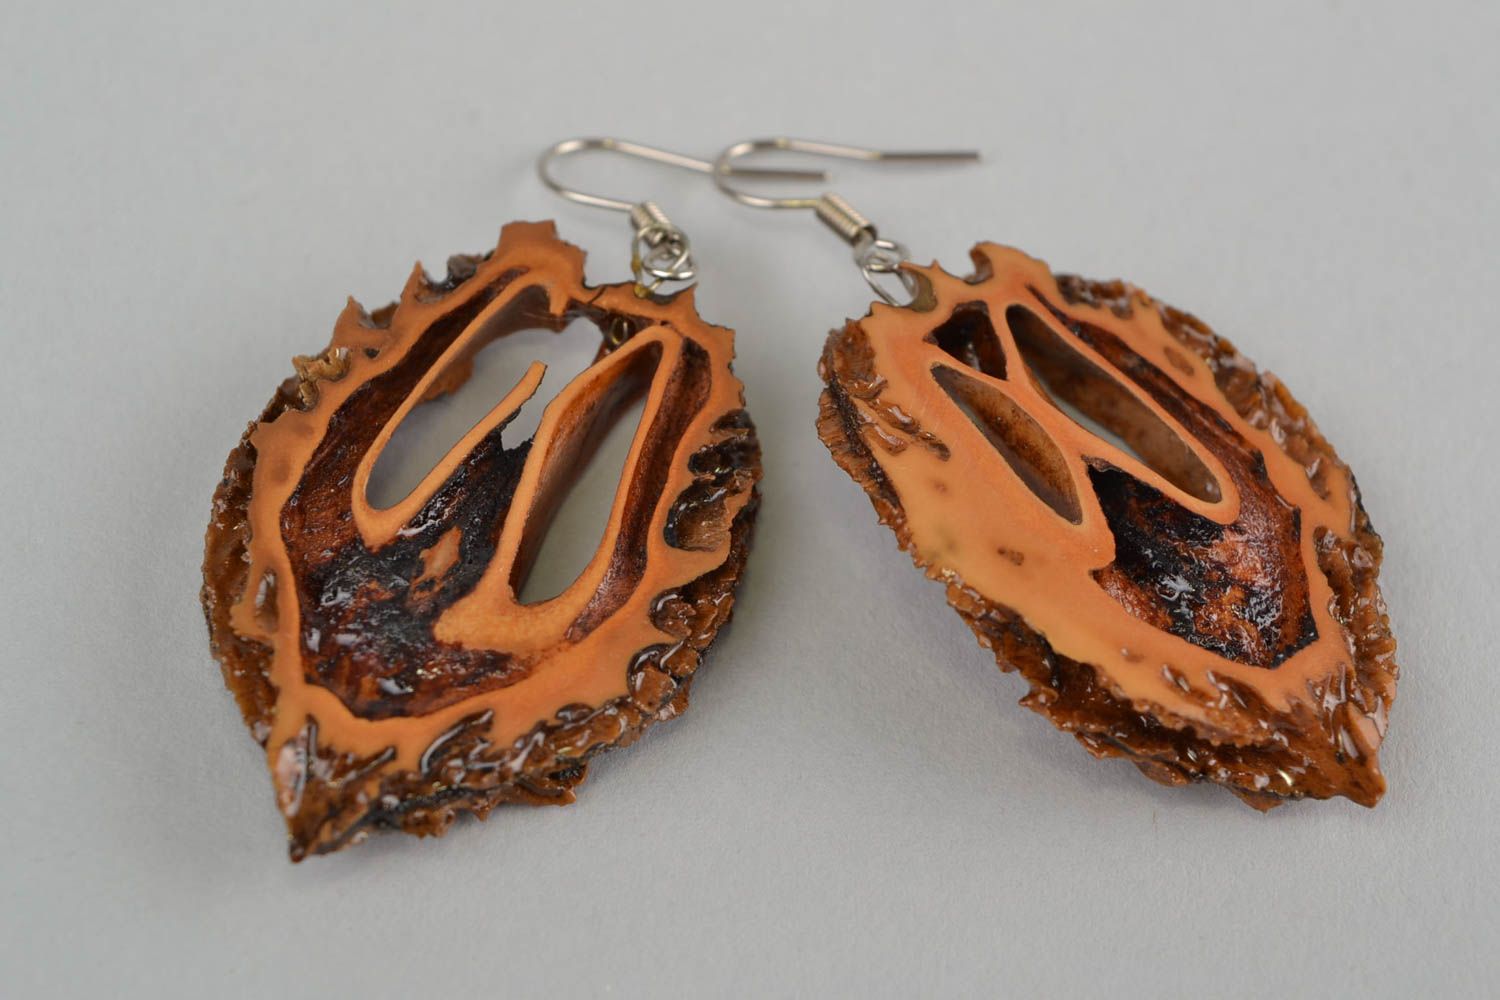 Handmade earrings wooden jewelry unique earrings women accessories gifts for her photo 4